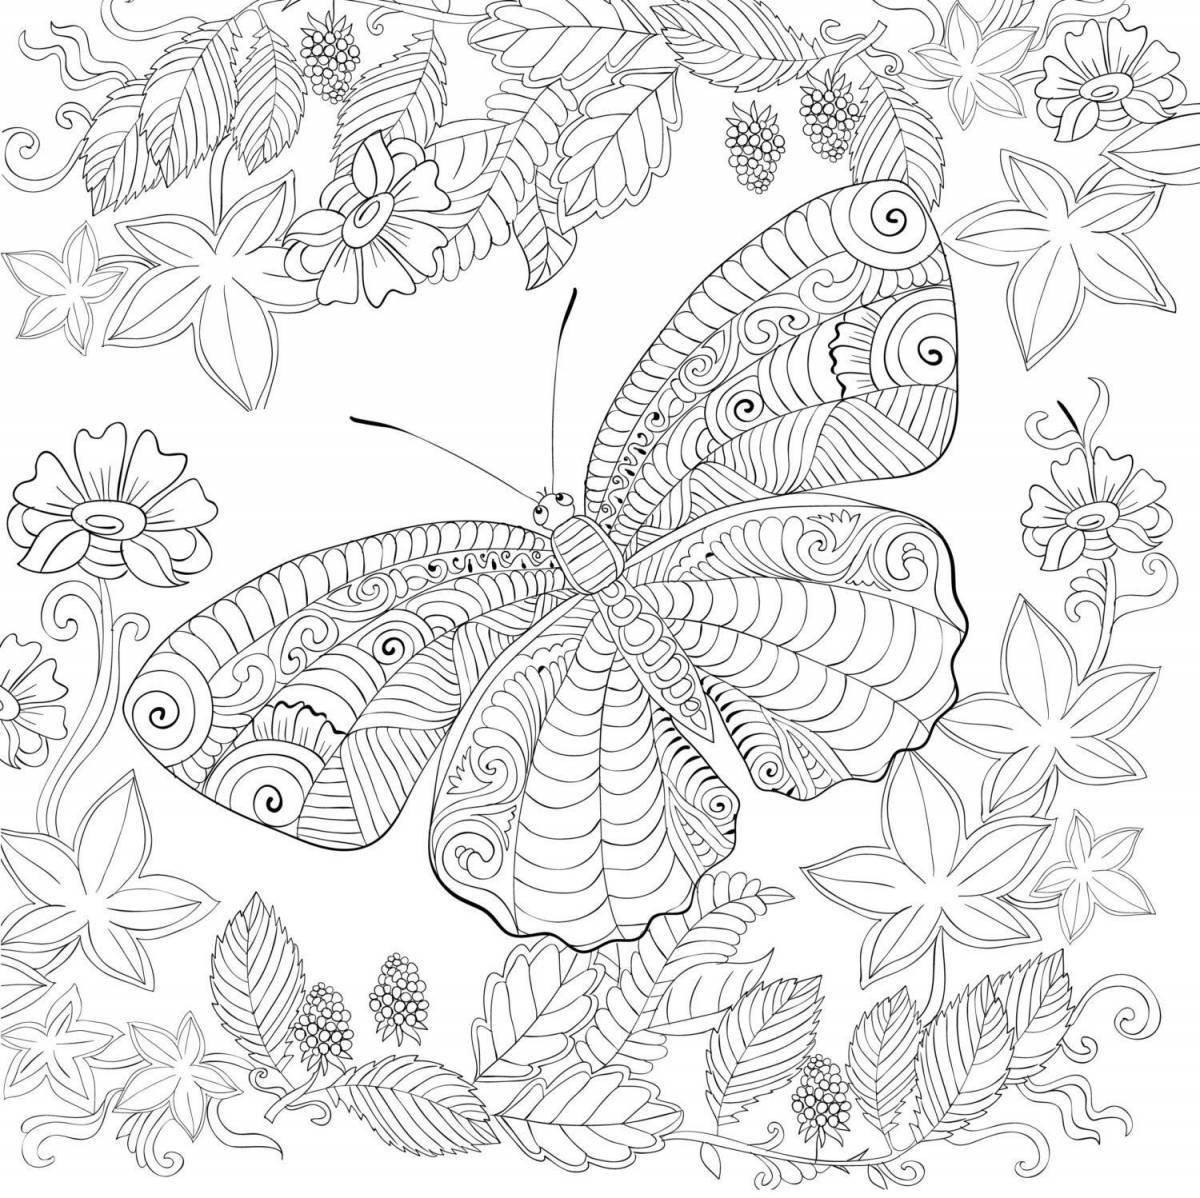 Blissful coloring game